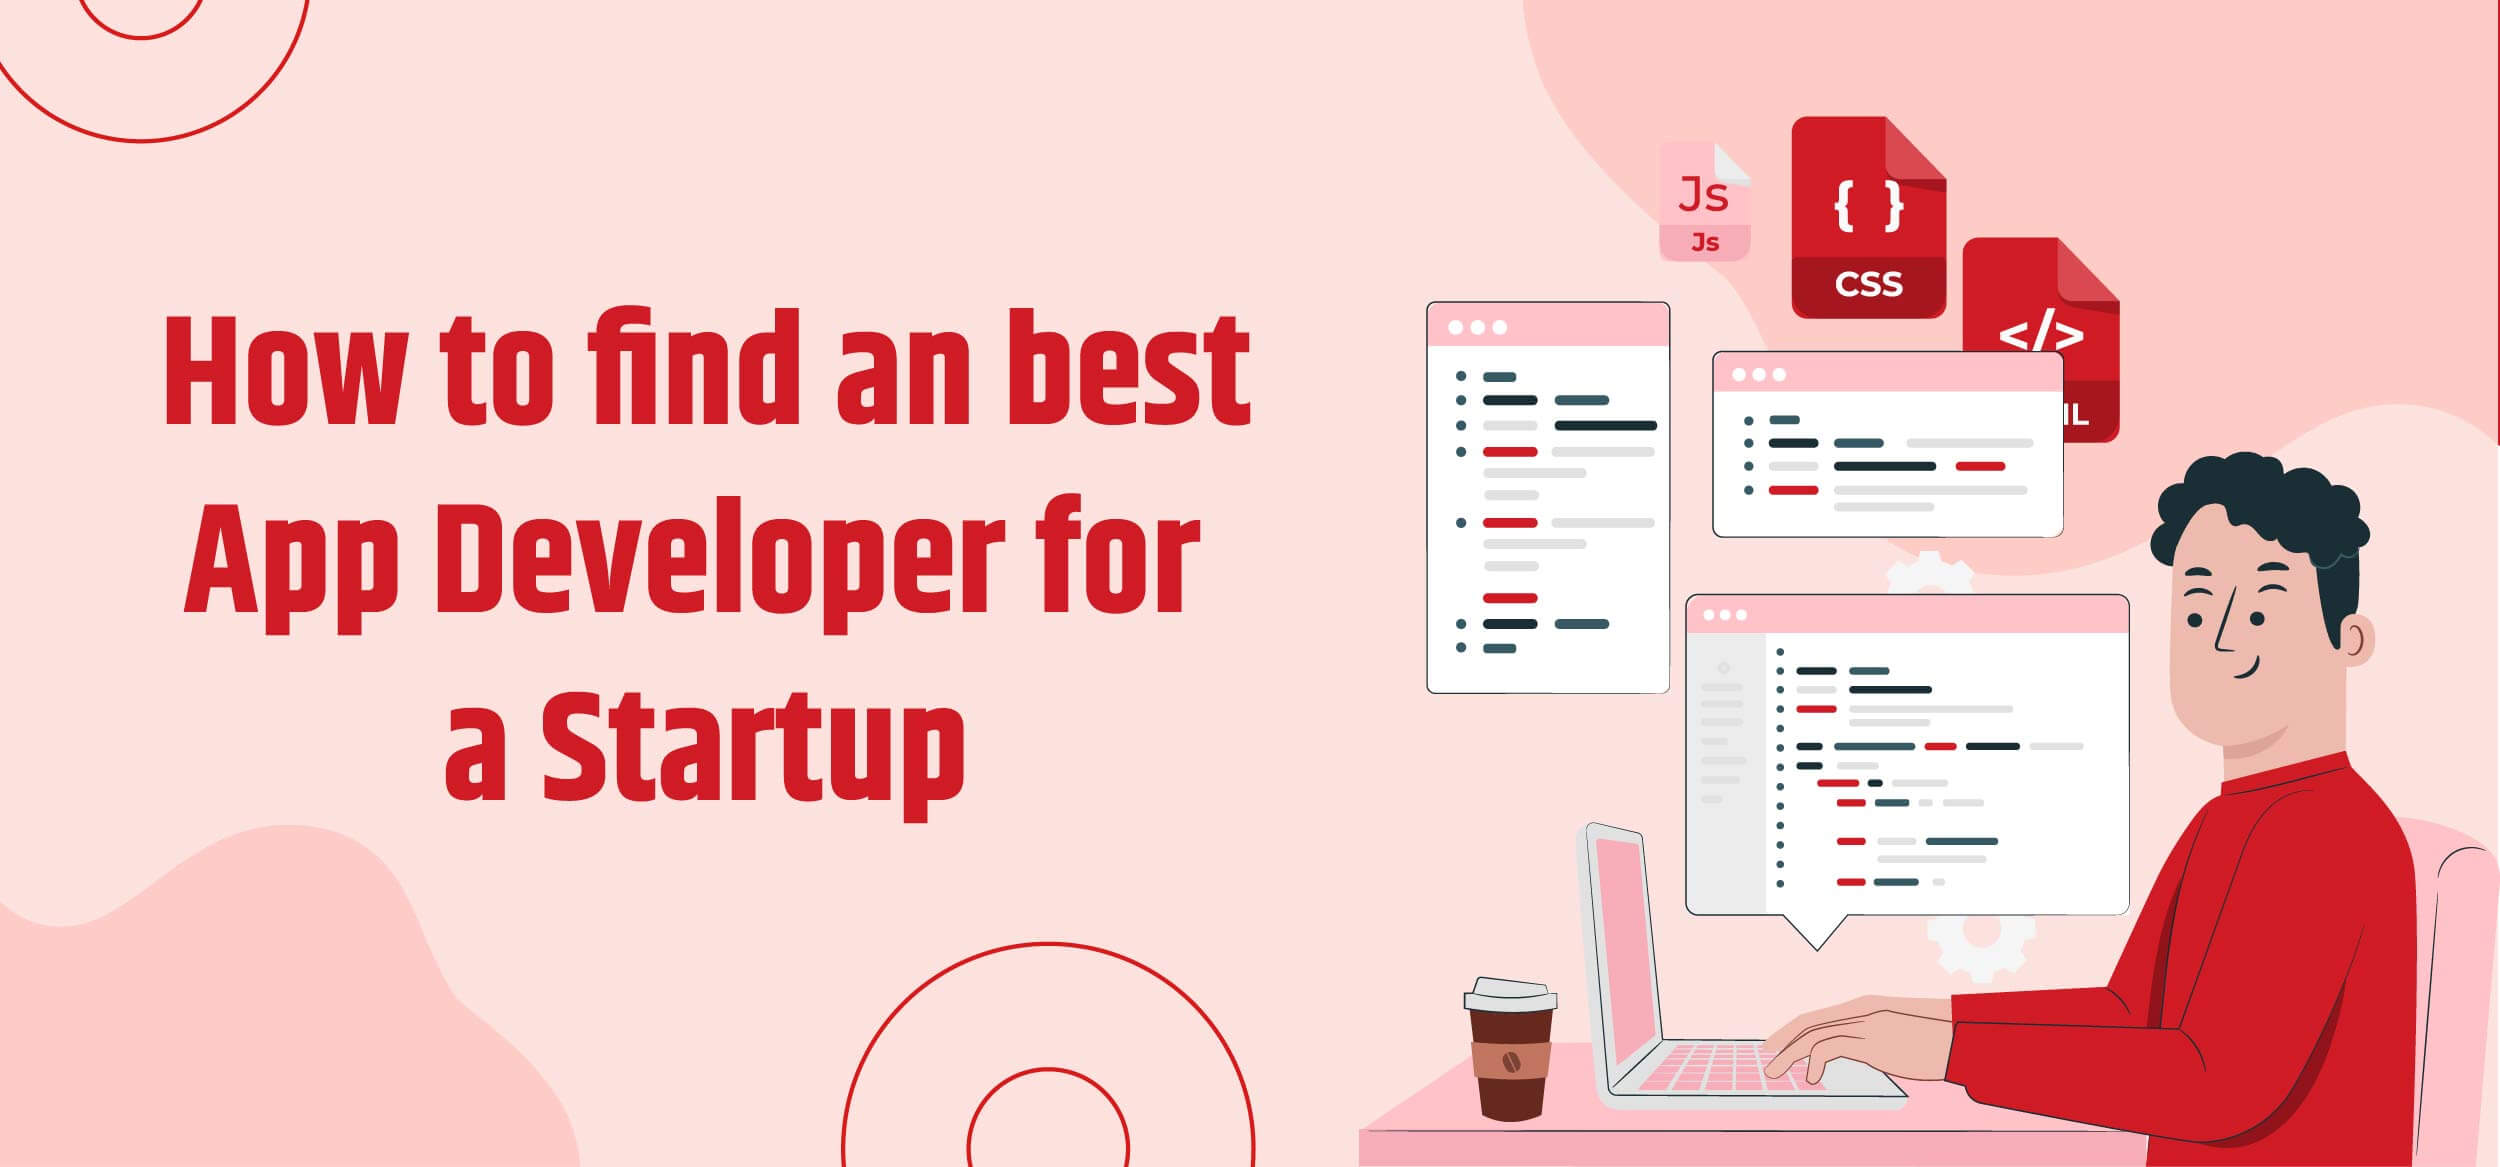 How To Find an Best App Developer For A Startup